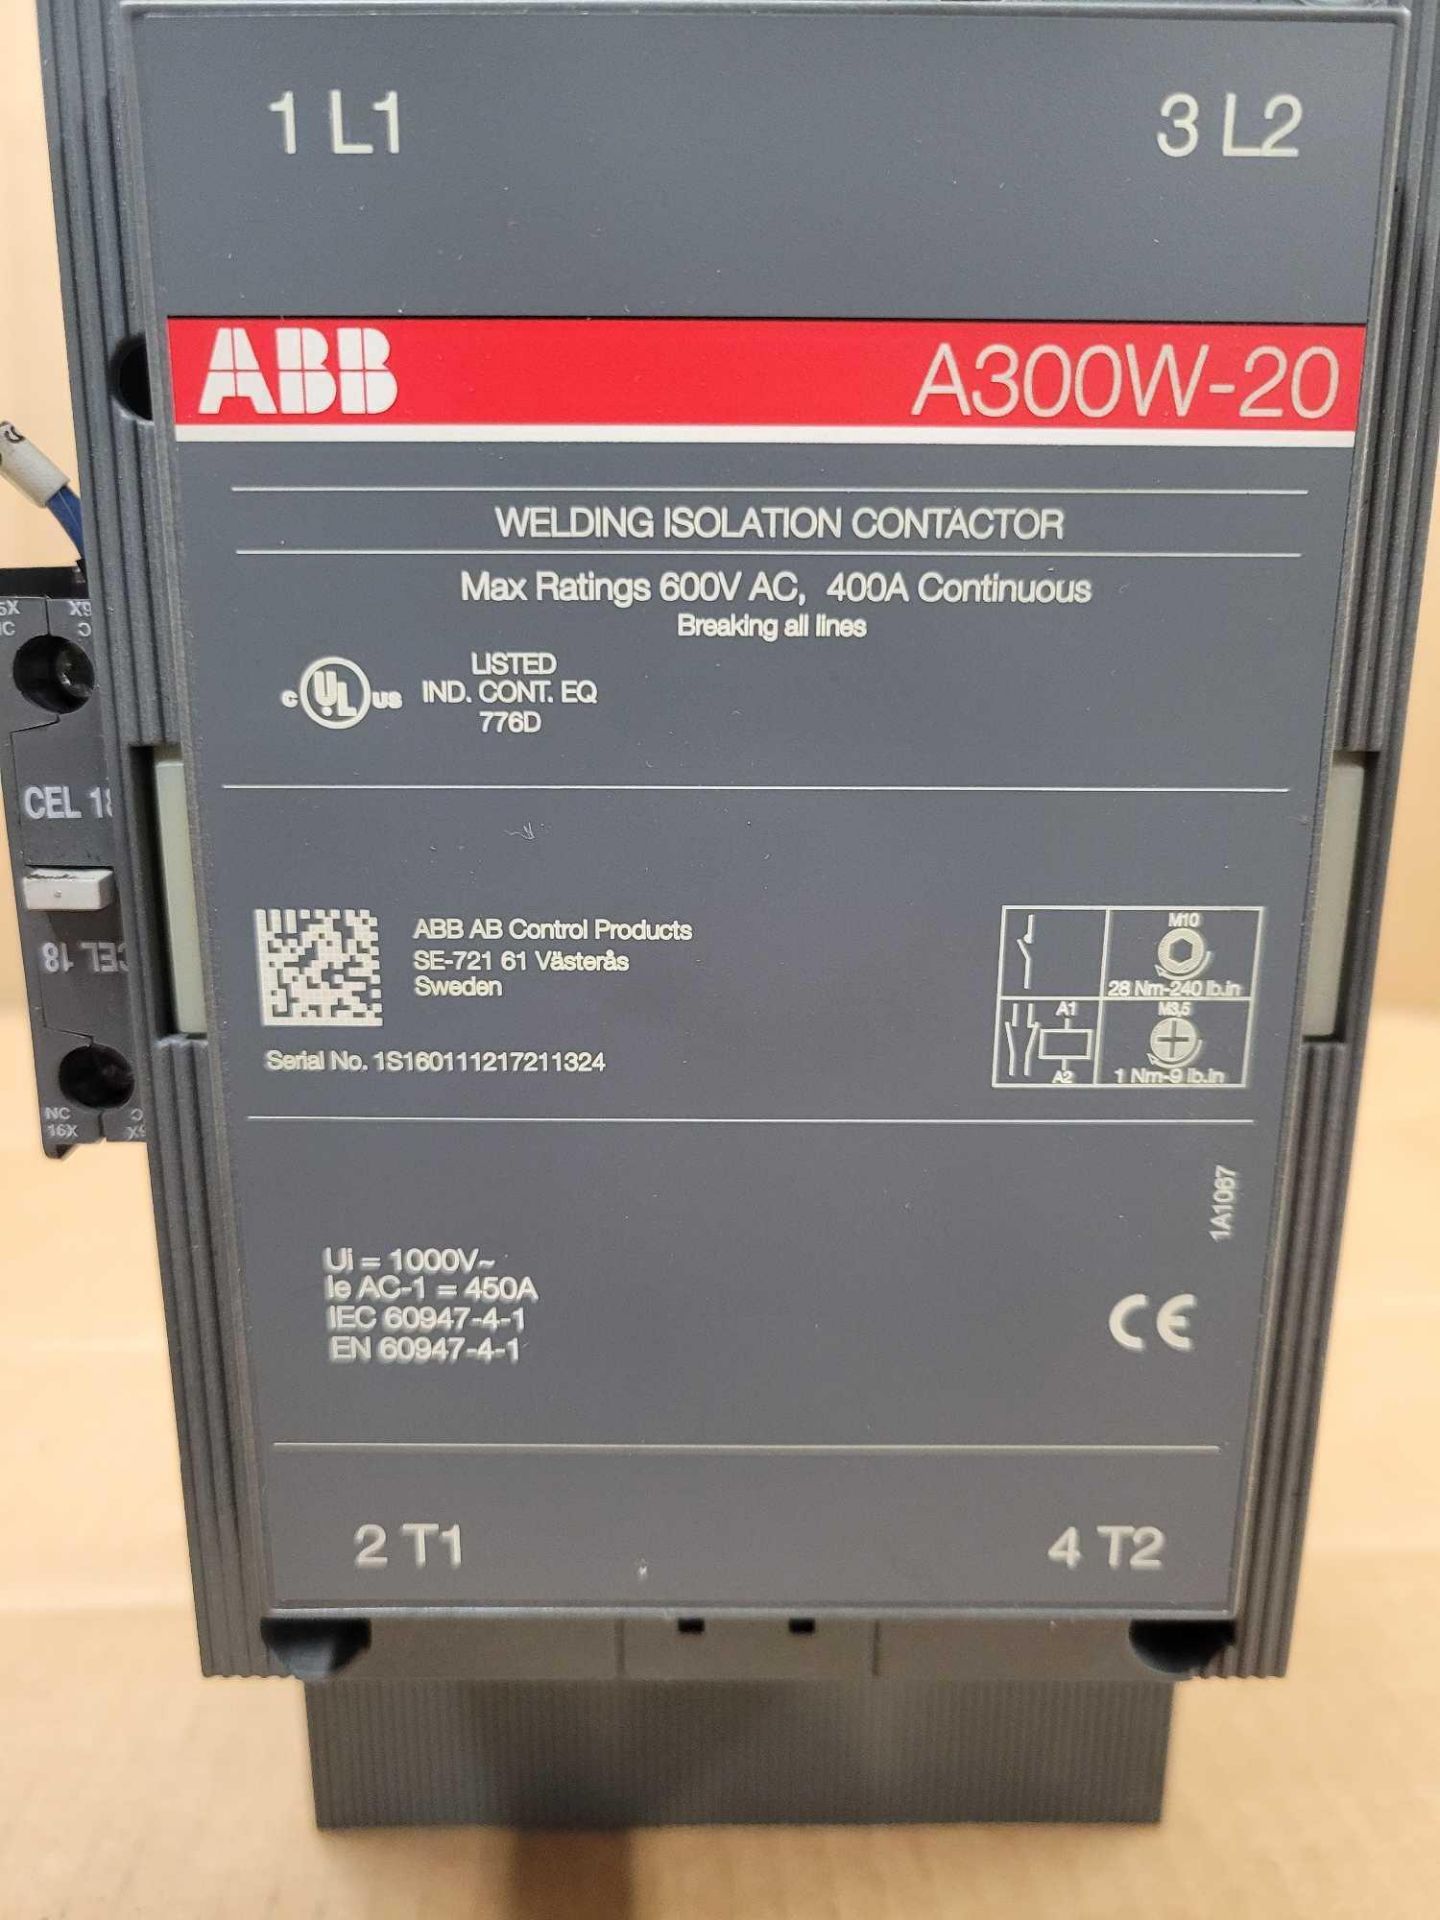 ABB A300W-20 / Welding Isolation Contactor  /  Lot Weight: 14.0 lbs - Image 5 of 6